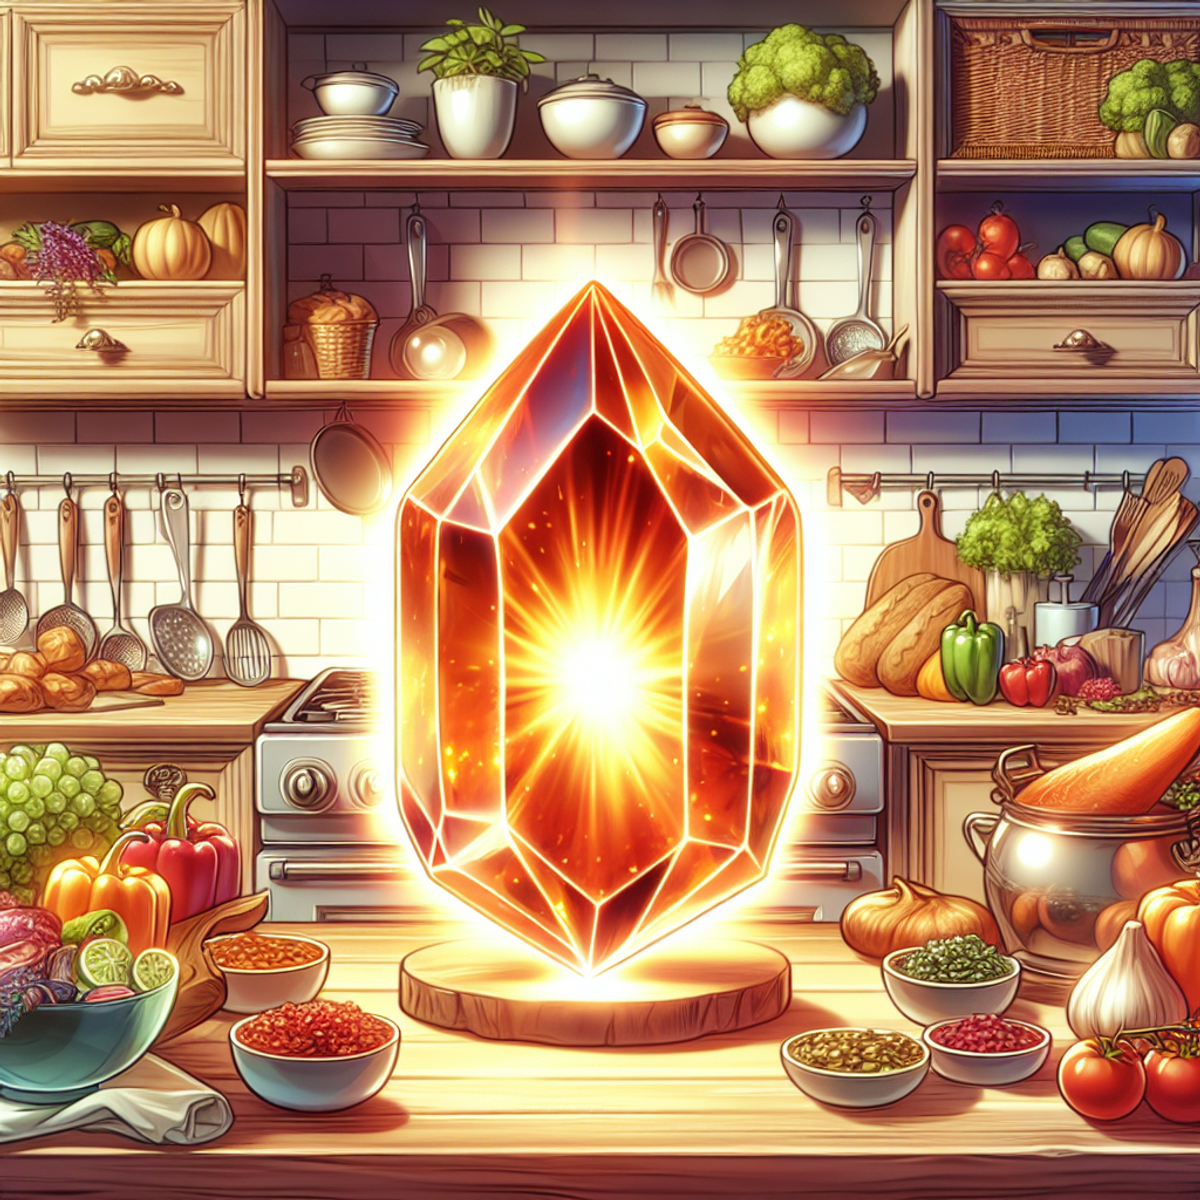 A large, radiant sunstone emitting positive energy in a beautifully organized kitchen filled with colorful and delicious ingredients.